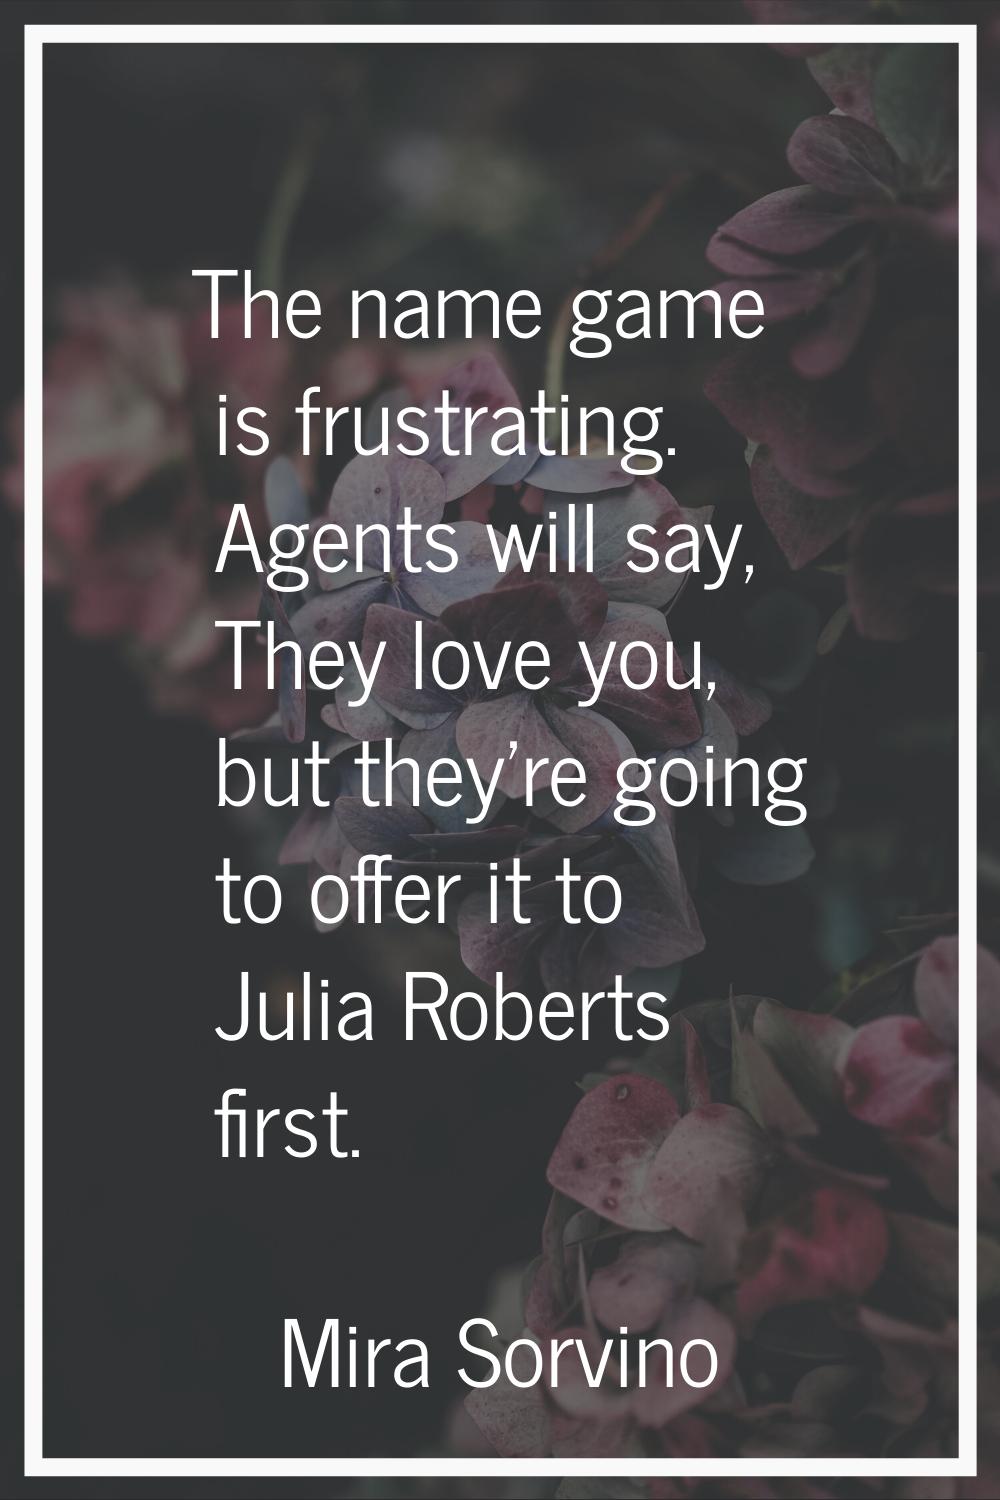 The name game is frustrating. Agents will say, They love you, but they're going to offer it to Juli